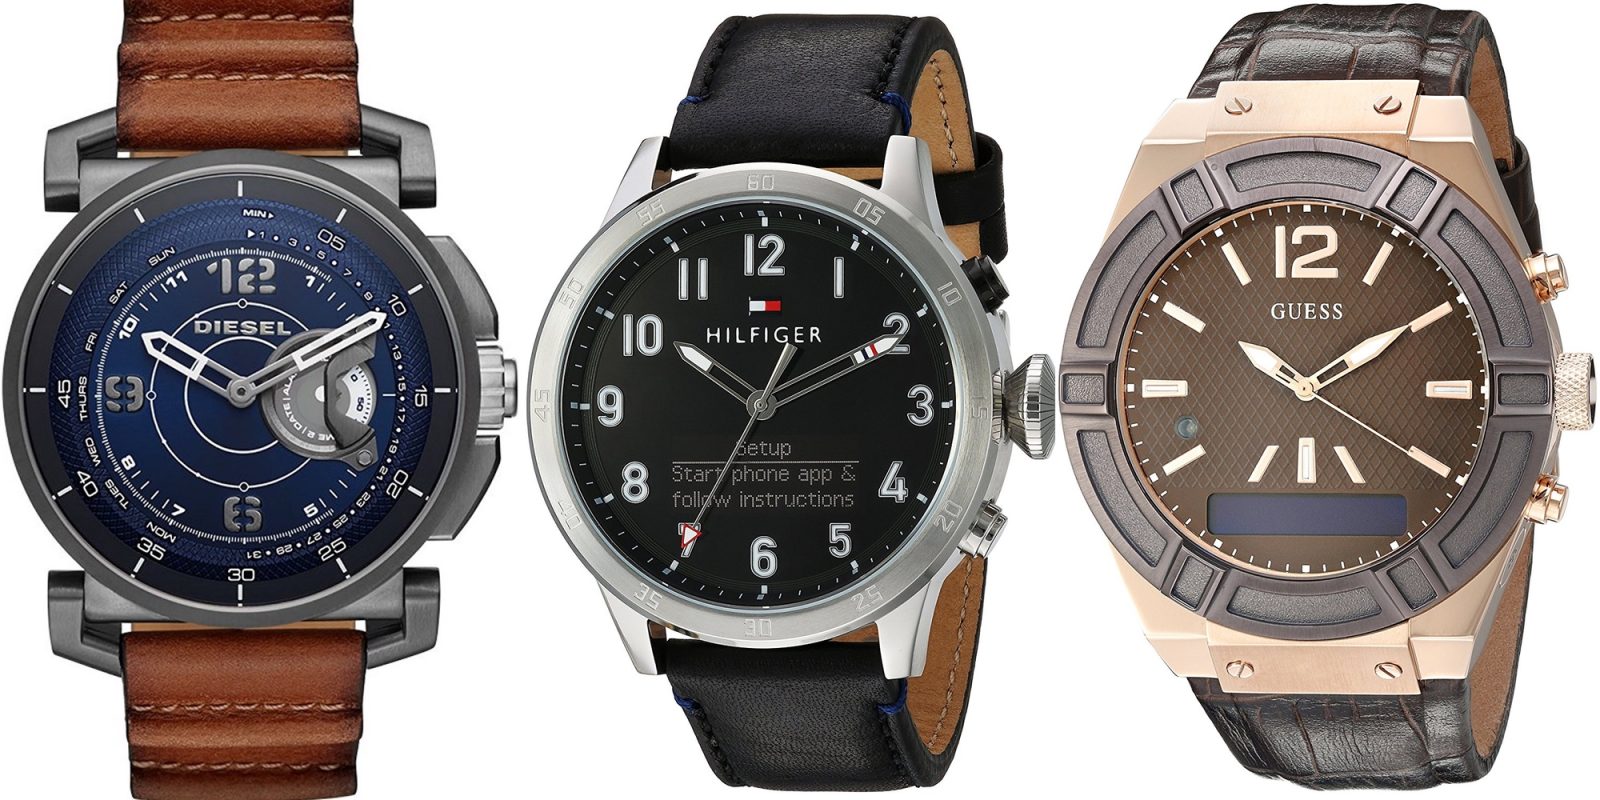 Amazon Prime Day Smartwatches up to 30% off: Guess, Diesel, Timex, more ...